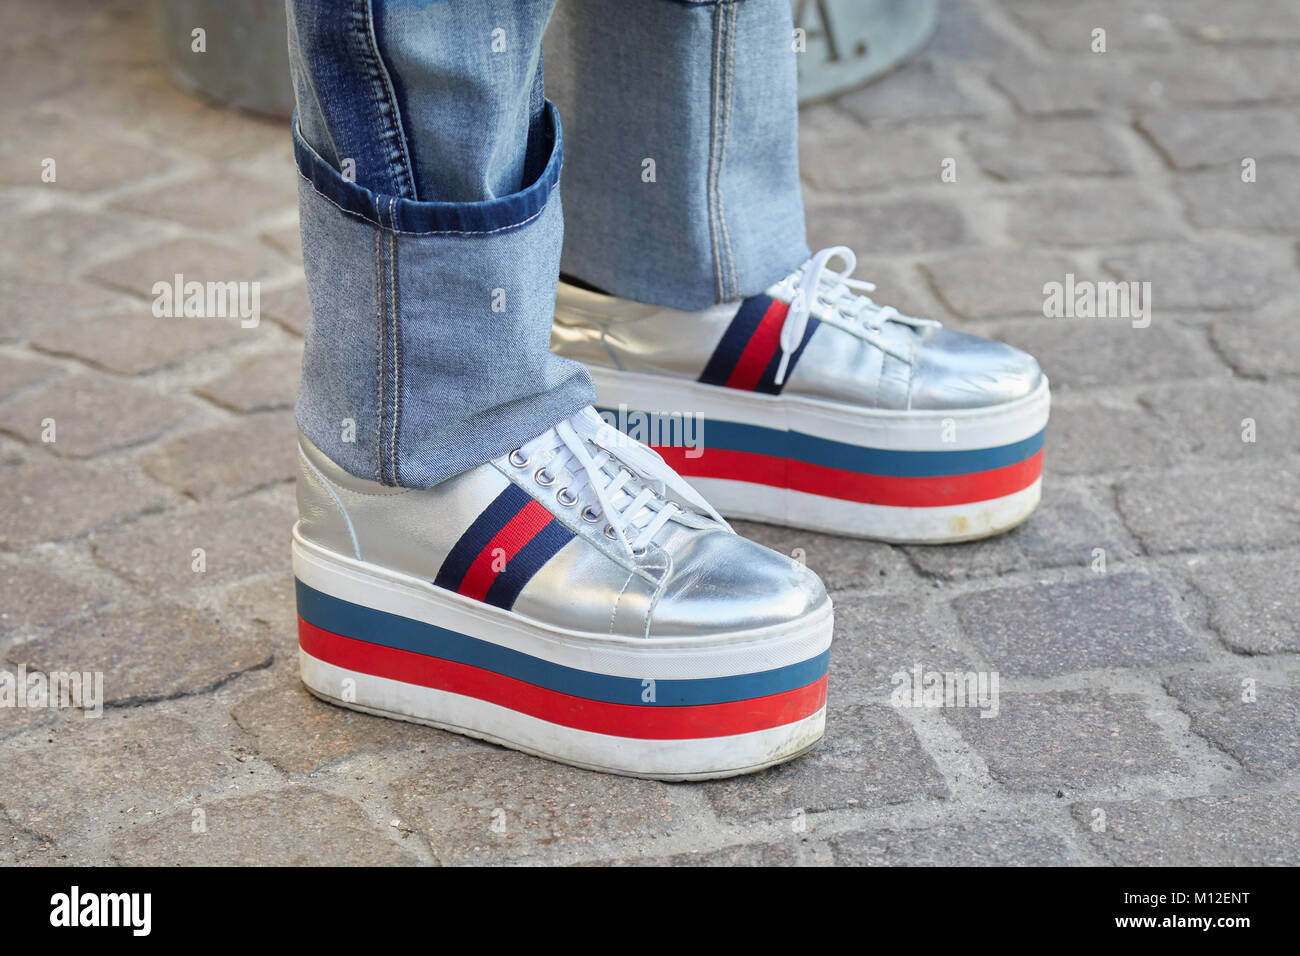 Red Wedge Sneakers High Resolution Stock Photography and Images - Alamy